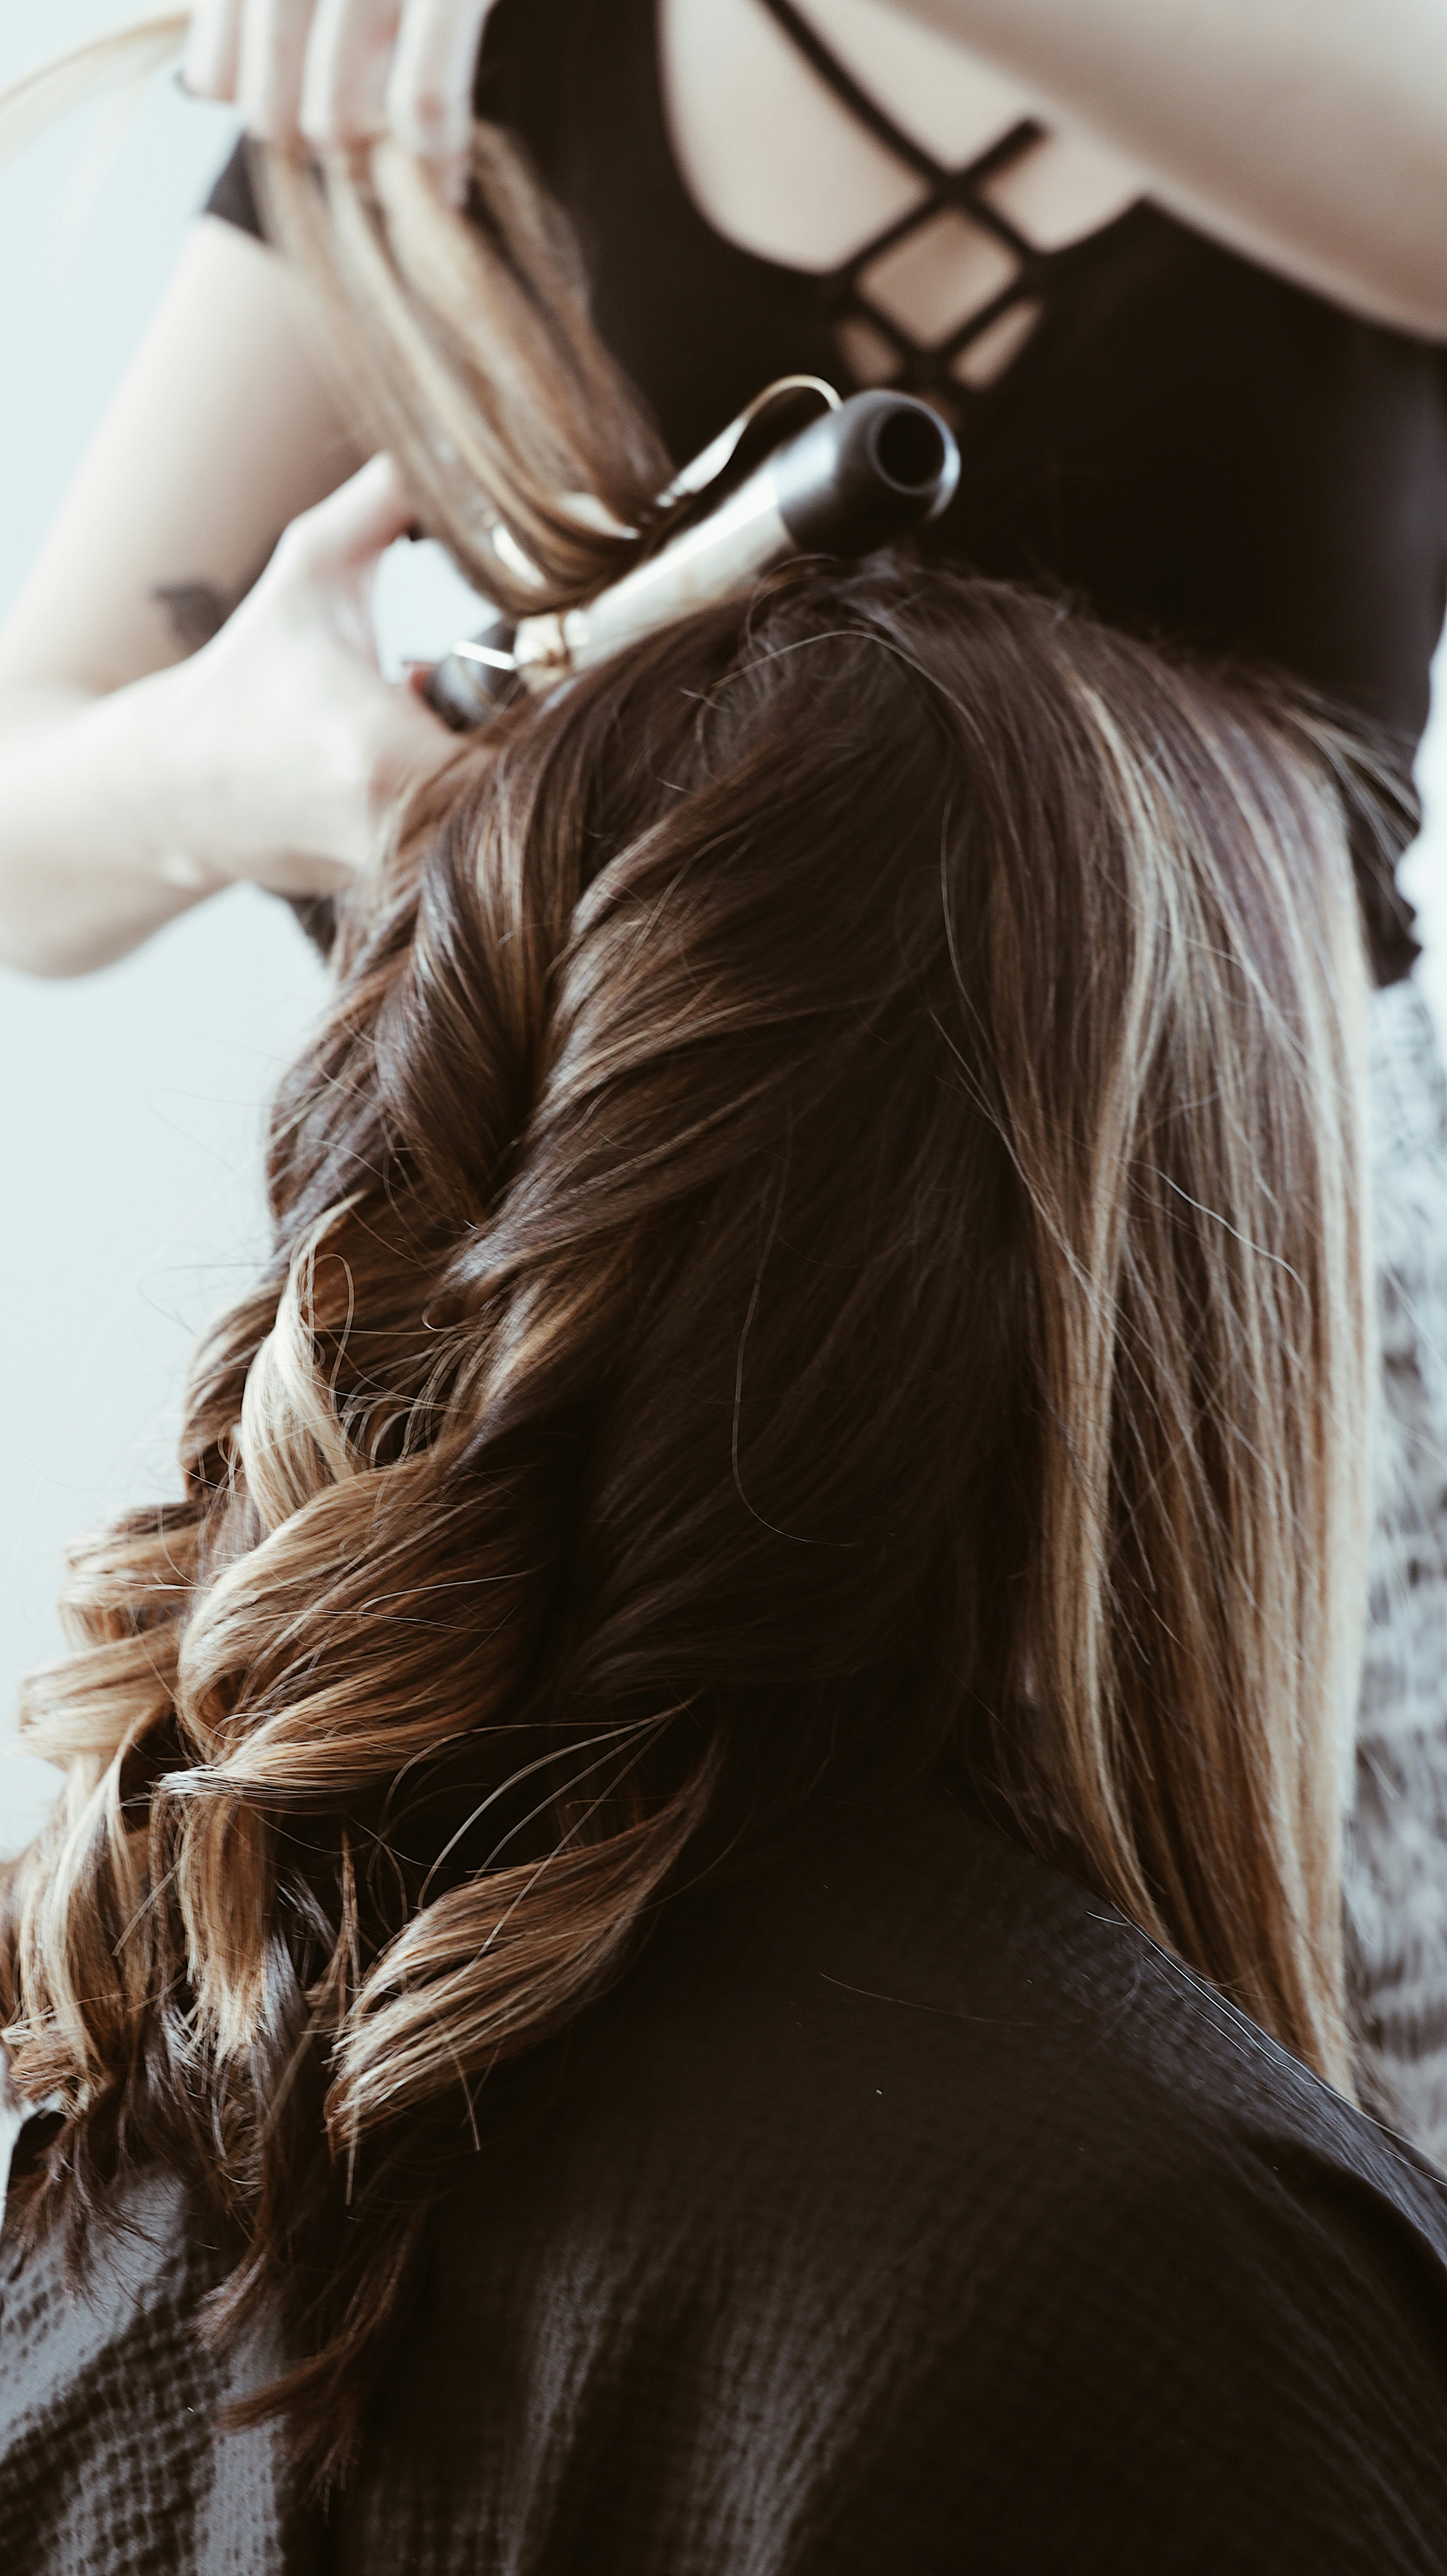 Can I Straighten My Hair Using A Curling Iron?